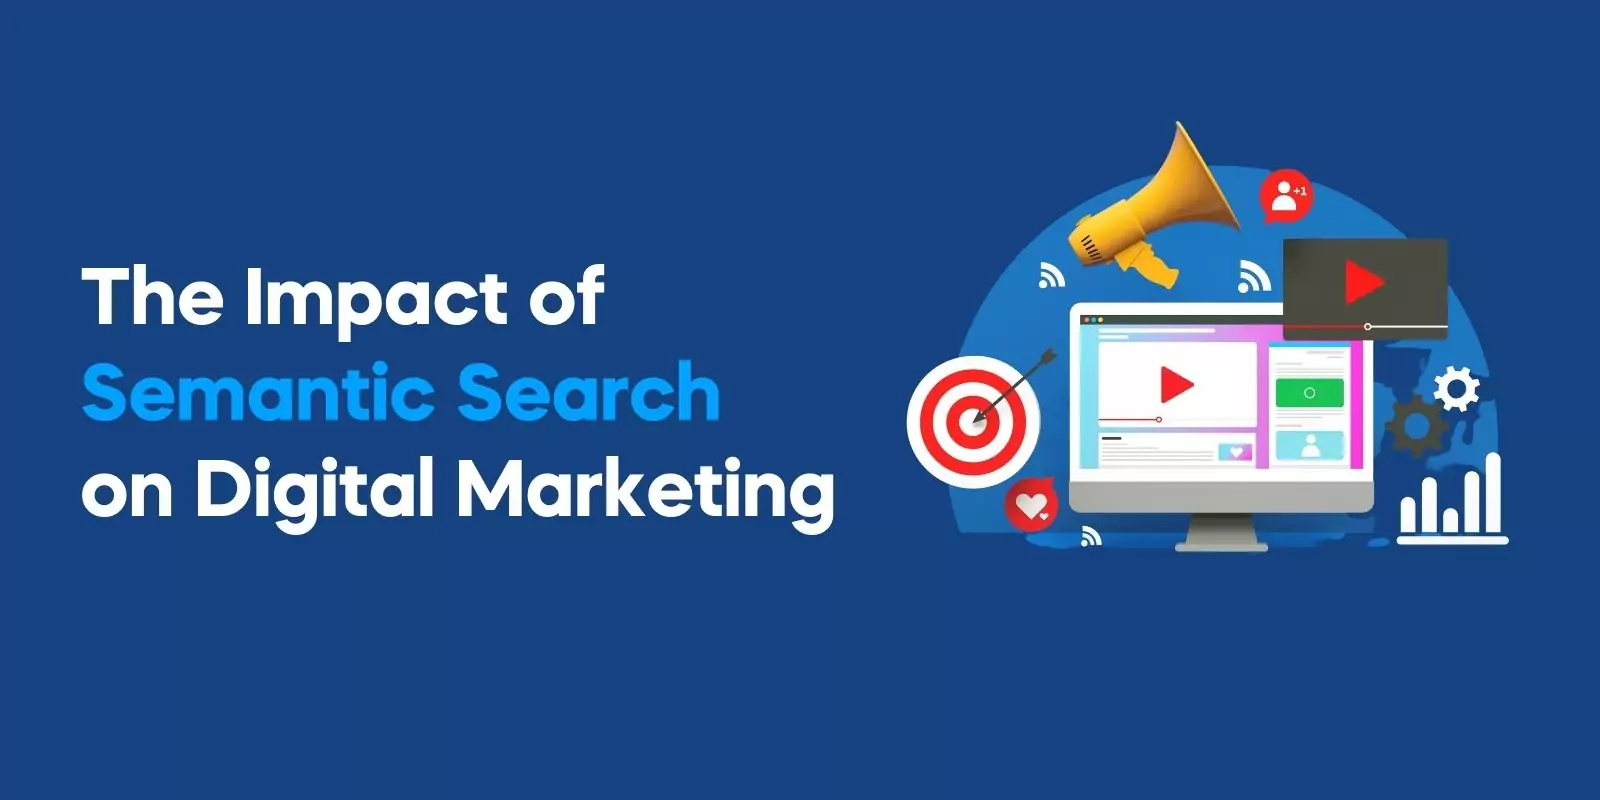 The Impact of Semantic Search on Digital Marketing